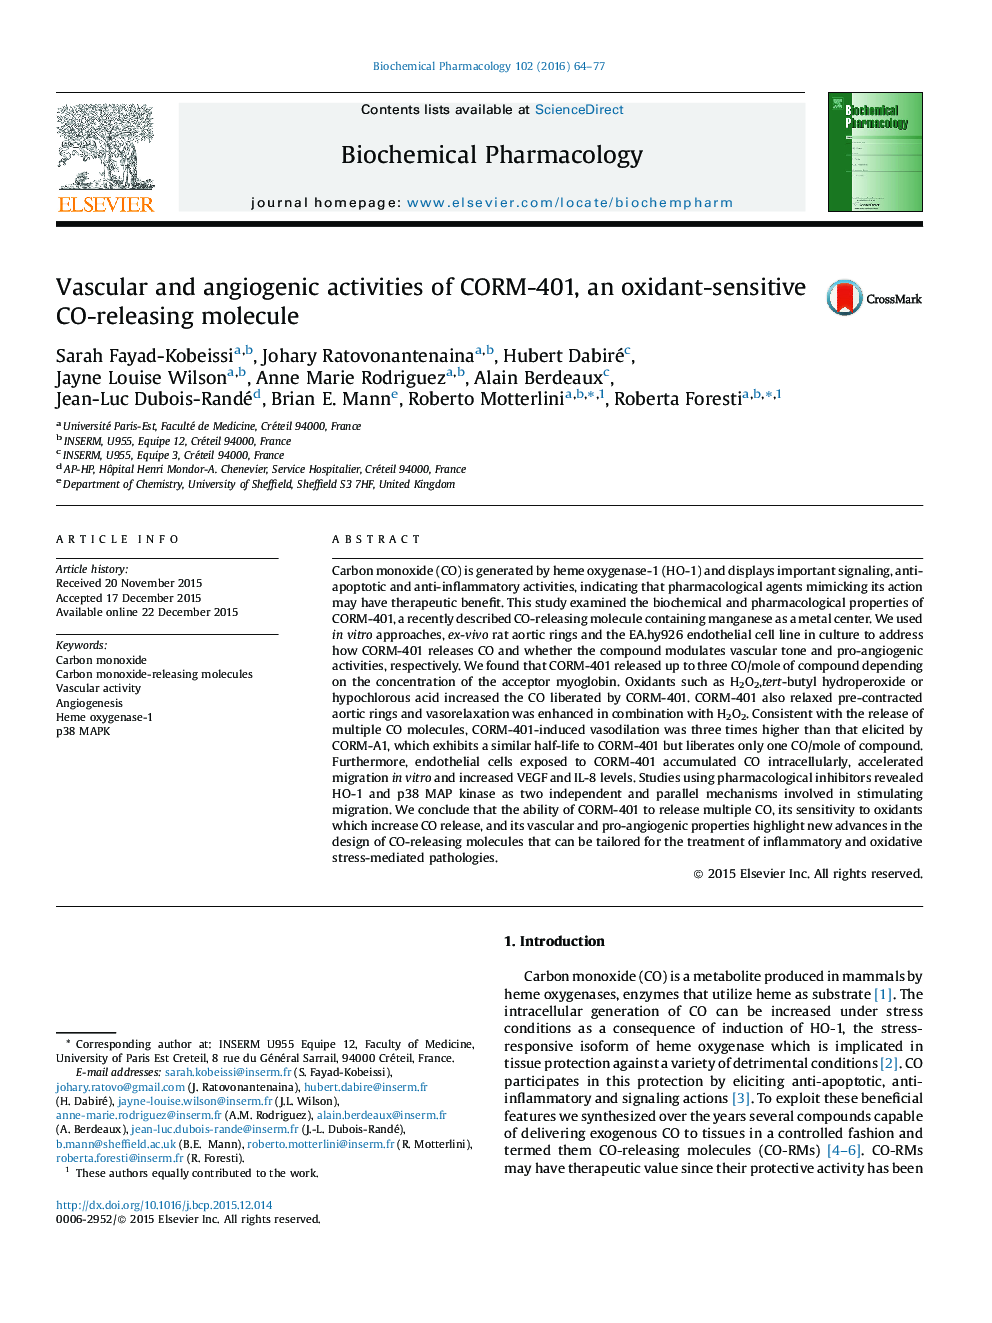 Vascular and angiogenic activities of CORM-401, an oxidant-sensitive CO-releasing molecule